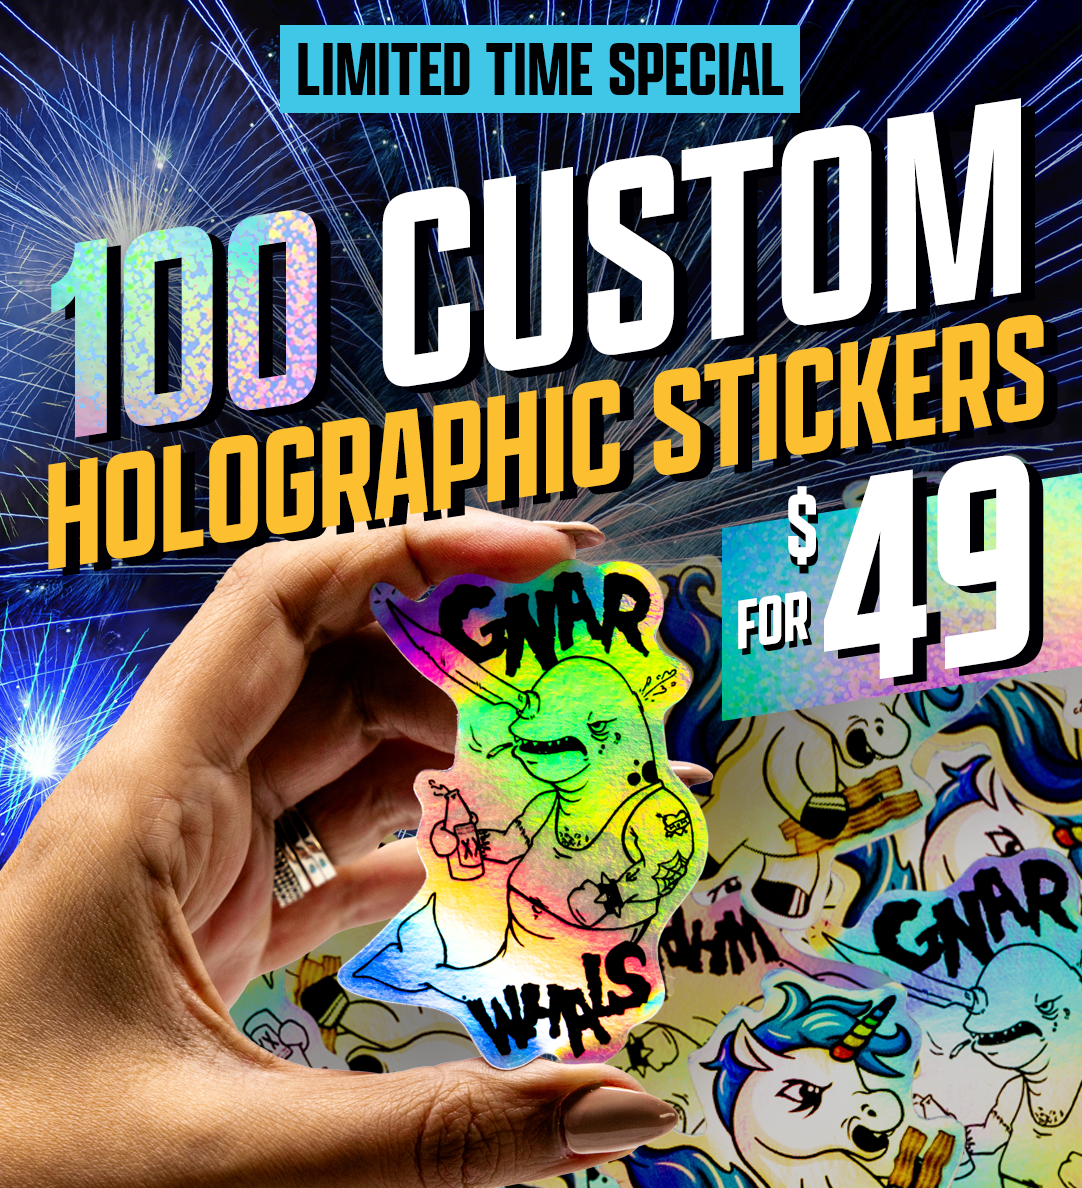 Foil personalised stickers with holographic printing